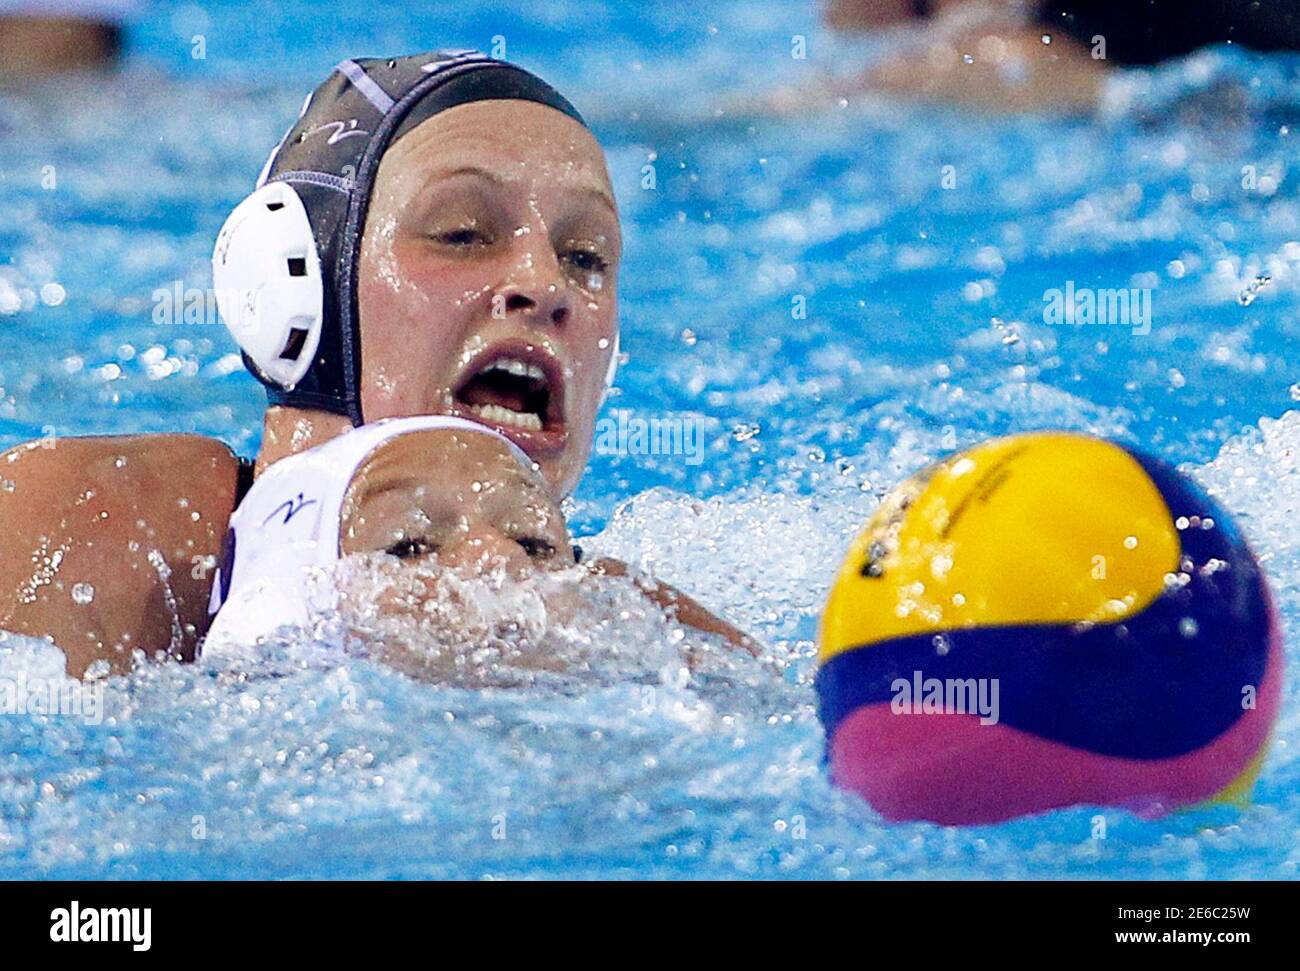 New Zealand's Ashley Elizabeth Smallfield (back) and Nomi Lisa Stomphorst of the Netherlands fight for possession of the ball during their women's water polo quarter-final qualification match at the 14th FINA World Championships in Shanghai July 23, 2011. REUTERS/David Gray (CHINA  - Tags: SPORT WATER POLO AQUATICS) Stock Photo